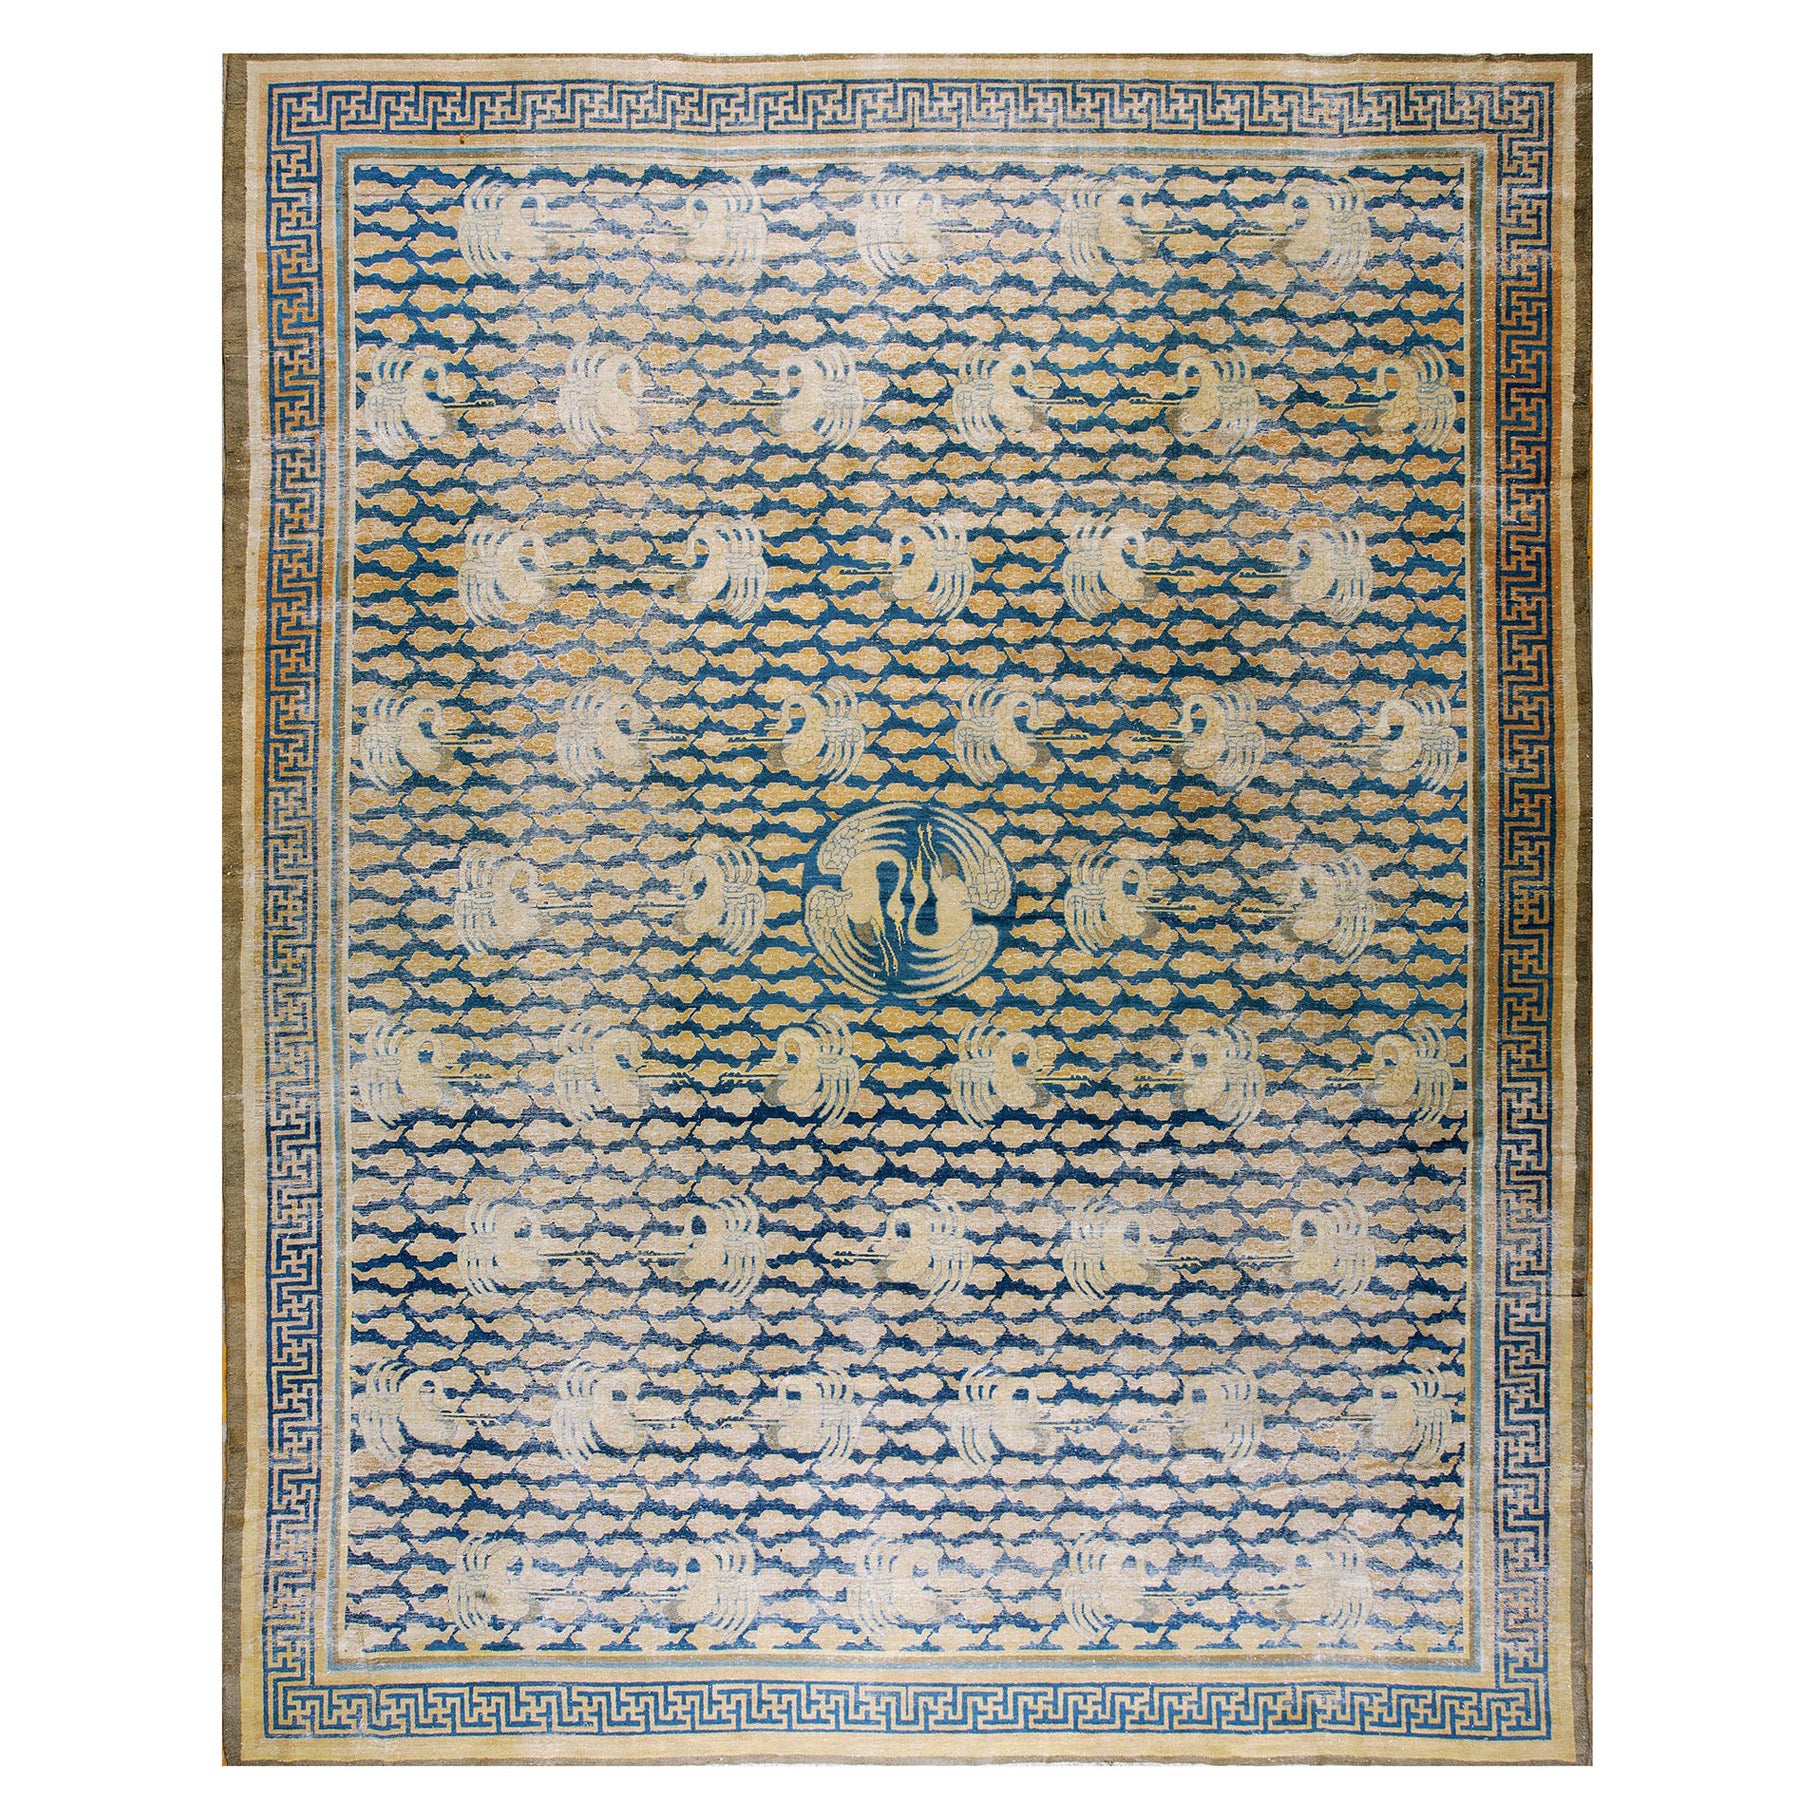 Late 19th Century Chinese Carpet ( 11'6'' x 14'6'' - 350 x 442 ) For Sale